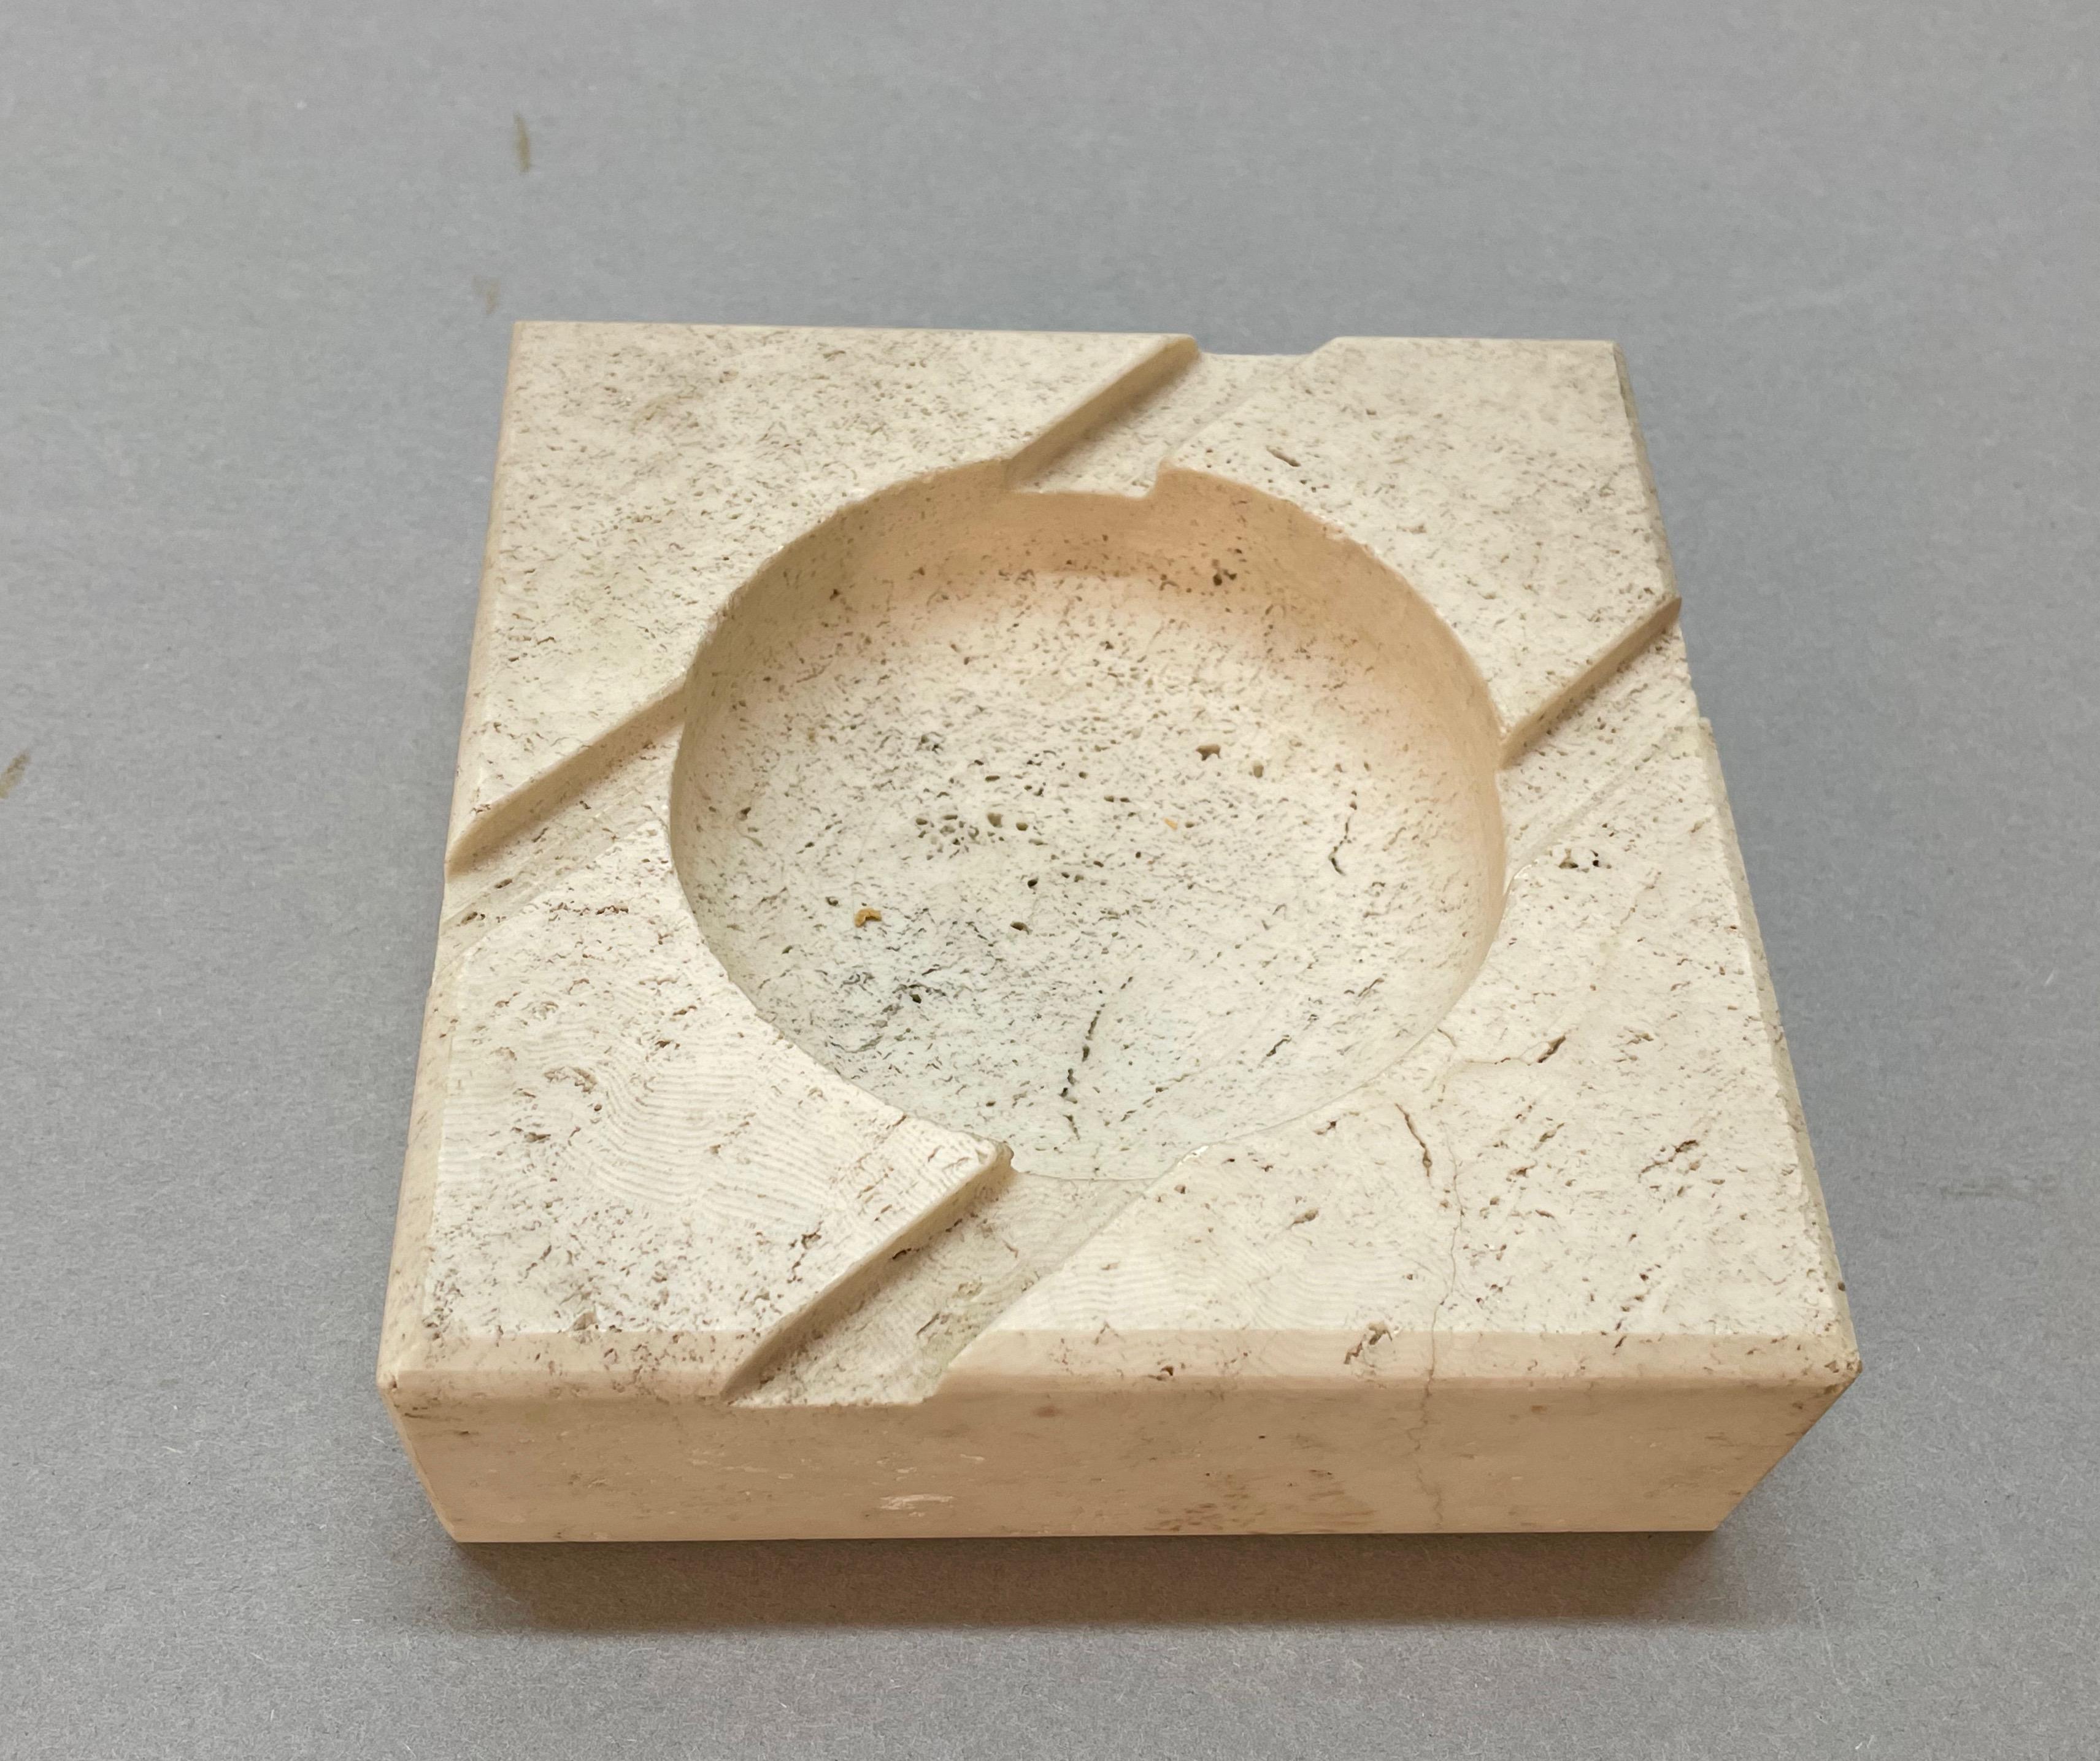 Midcentury Squared White Travertine Marble Italian Ashtray After Mannelli, 1970s For Sale 6